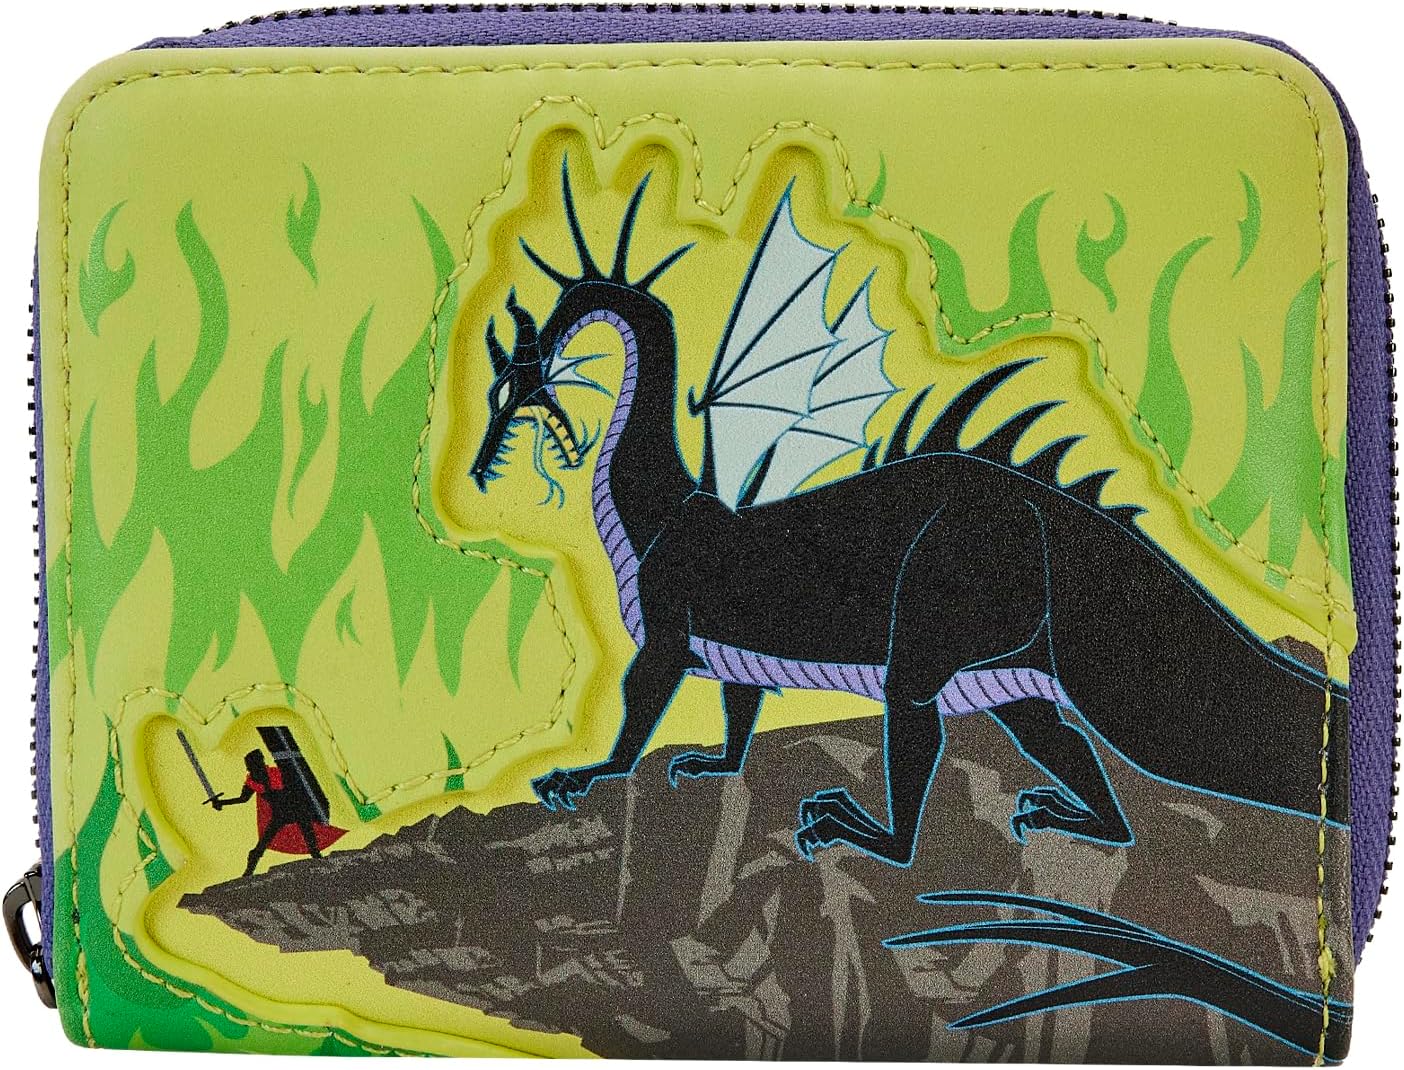 loungefly maleficent wallet 